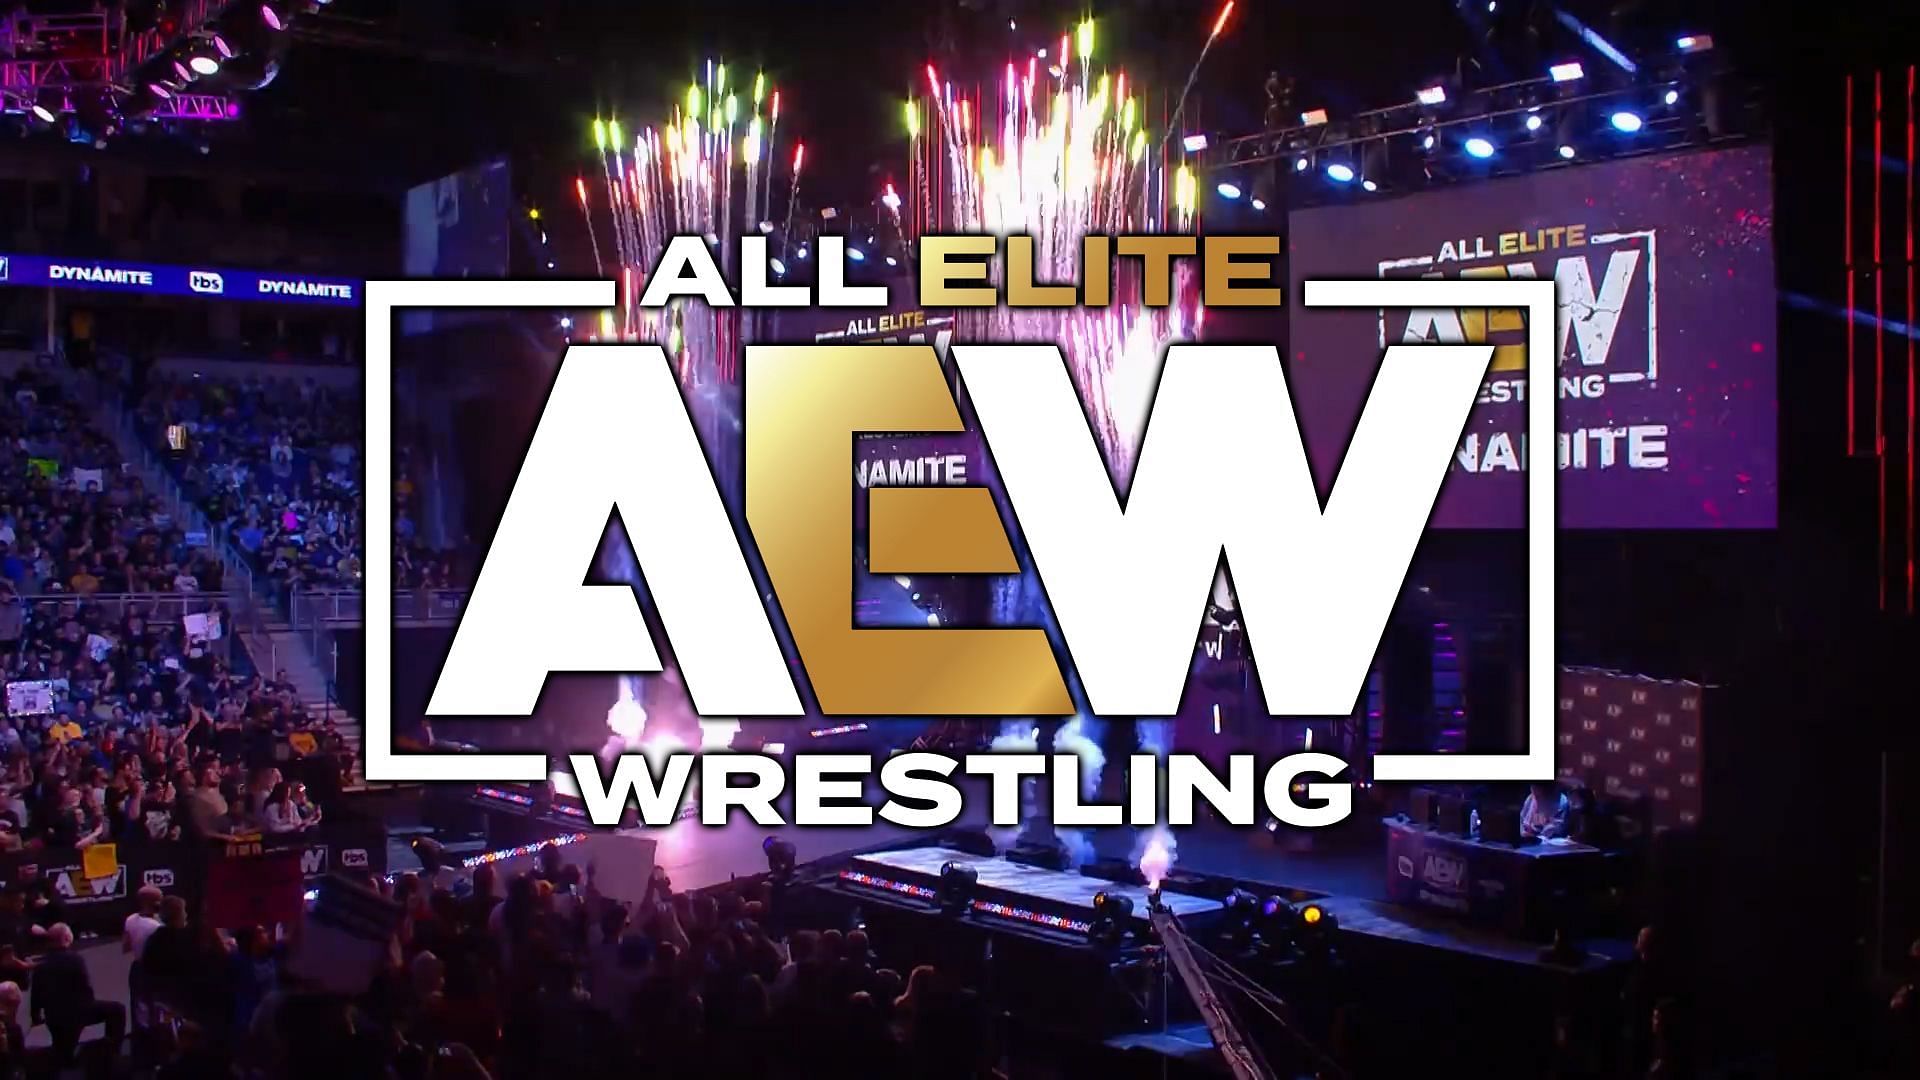 All Elite Wrestling is in a contract year (image credit: AEW on YouTube)